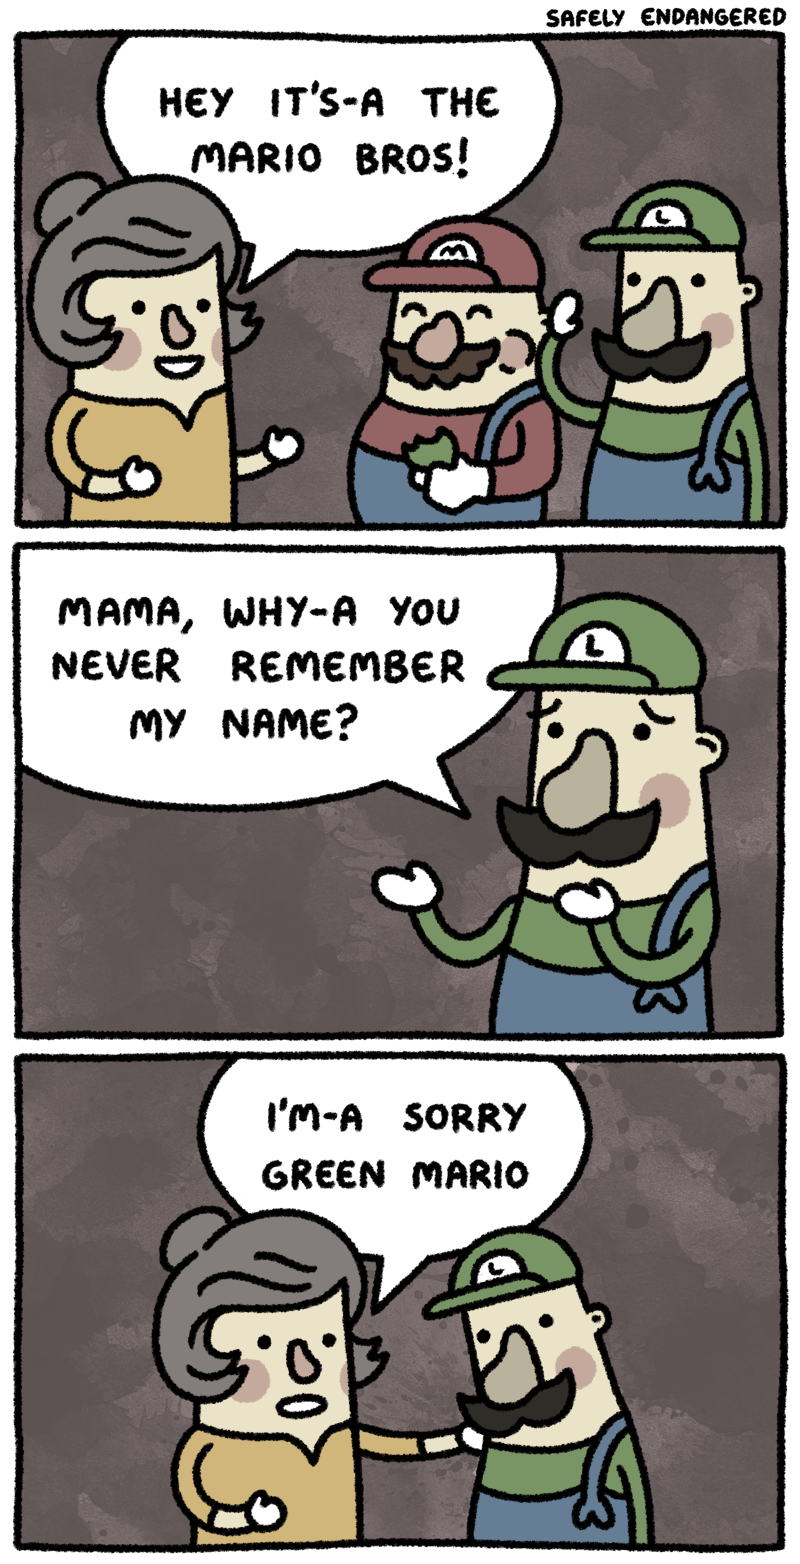 It's a me not Mario